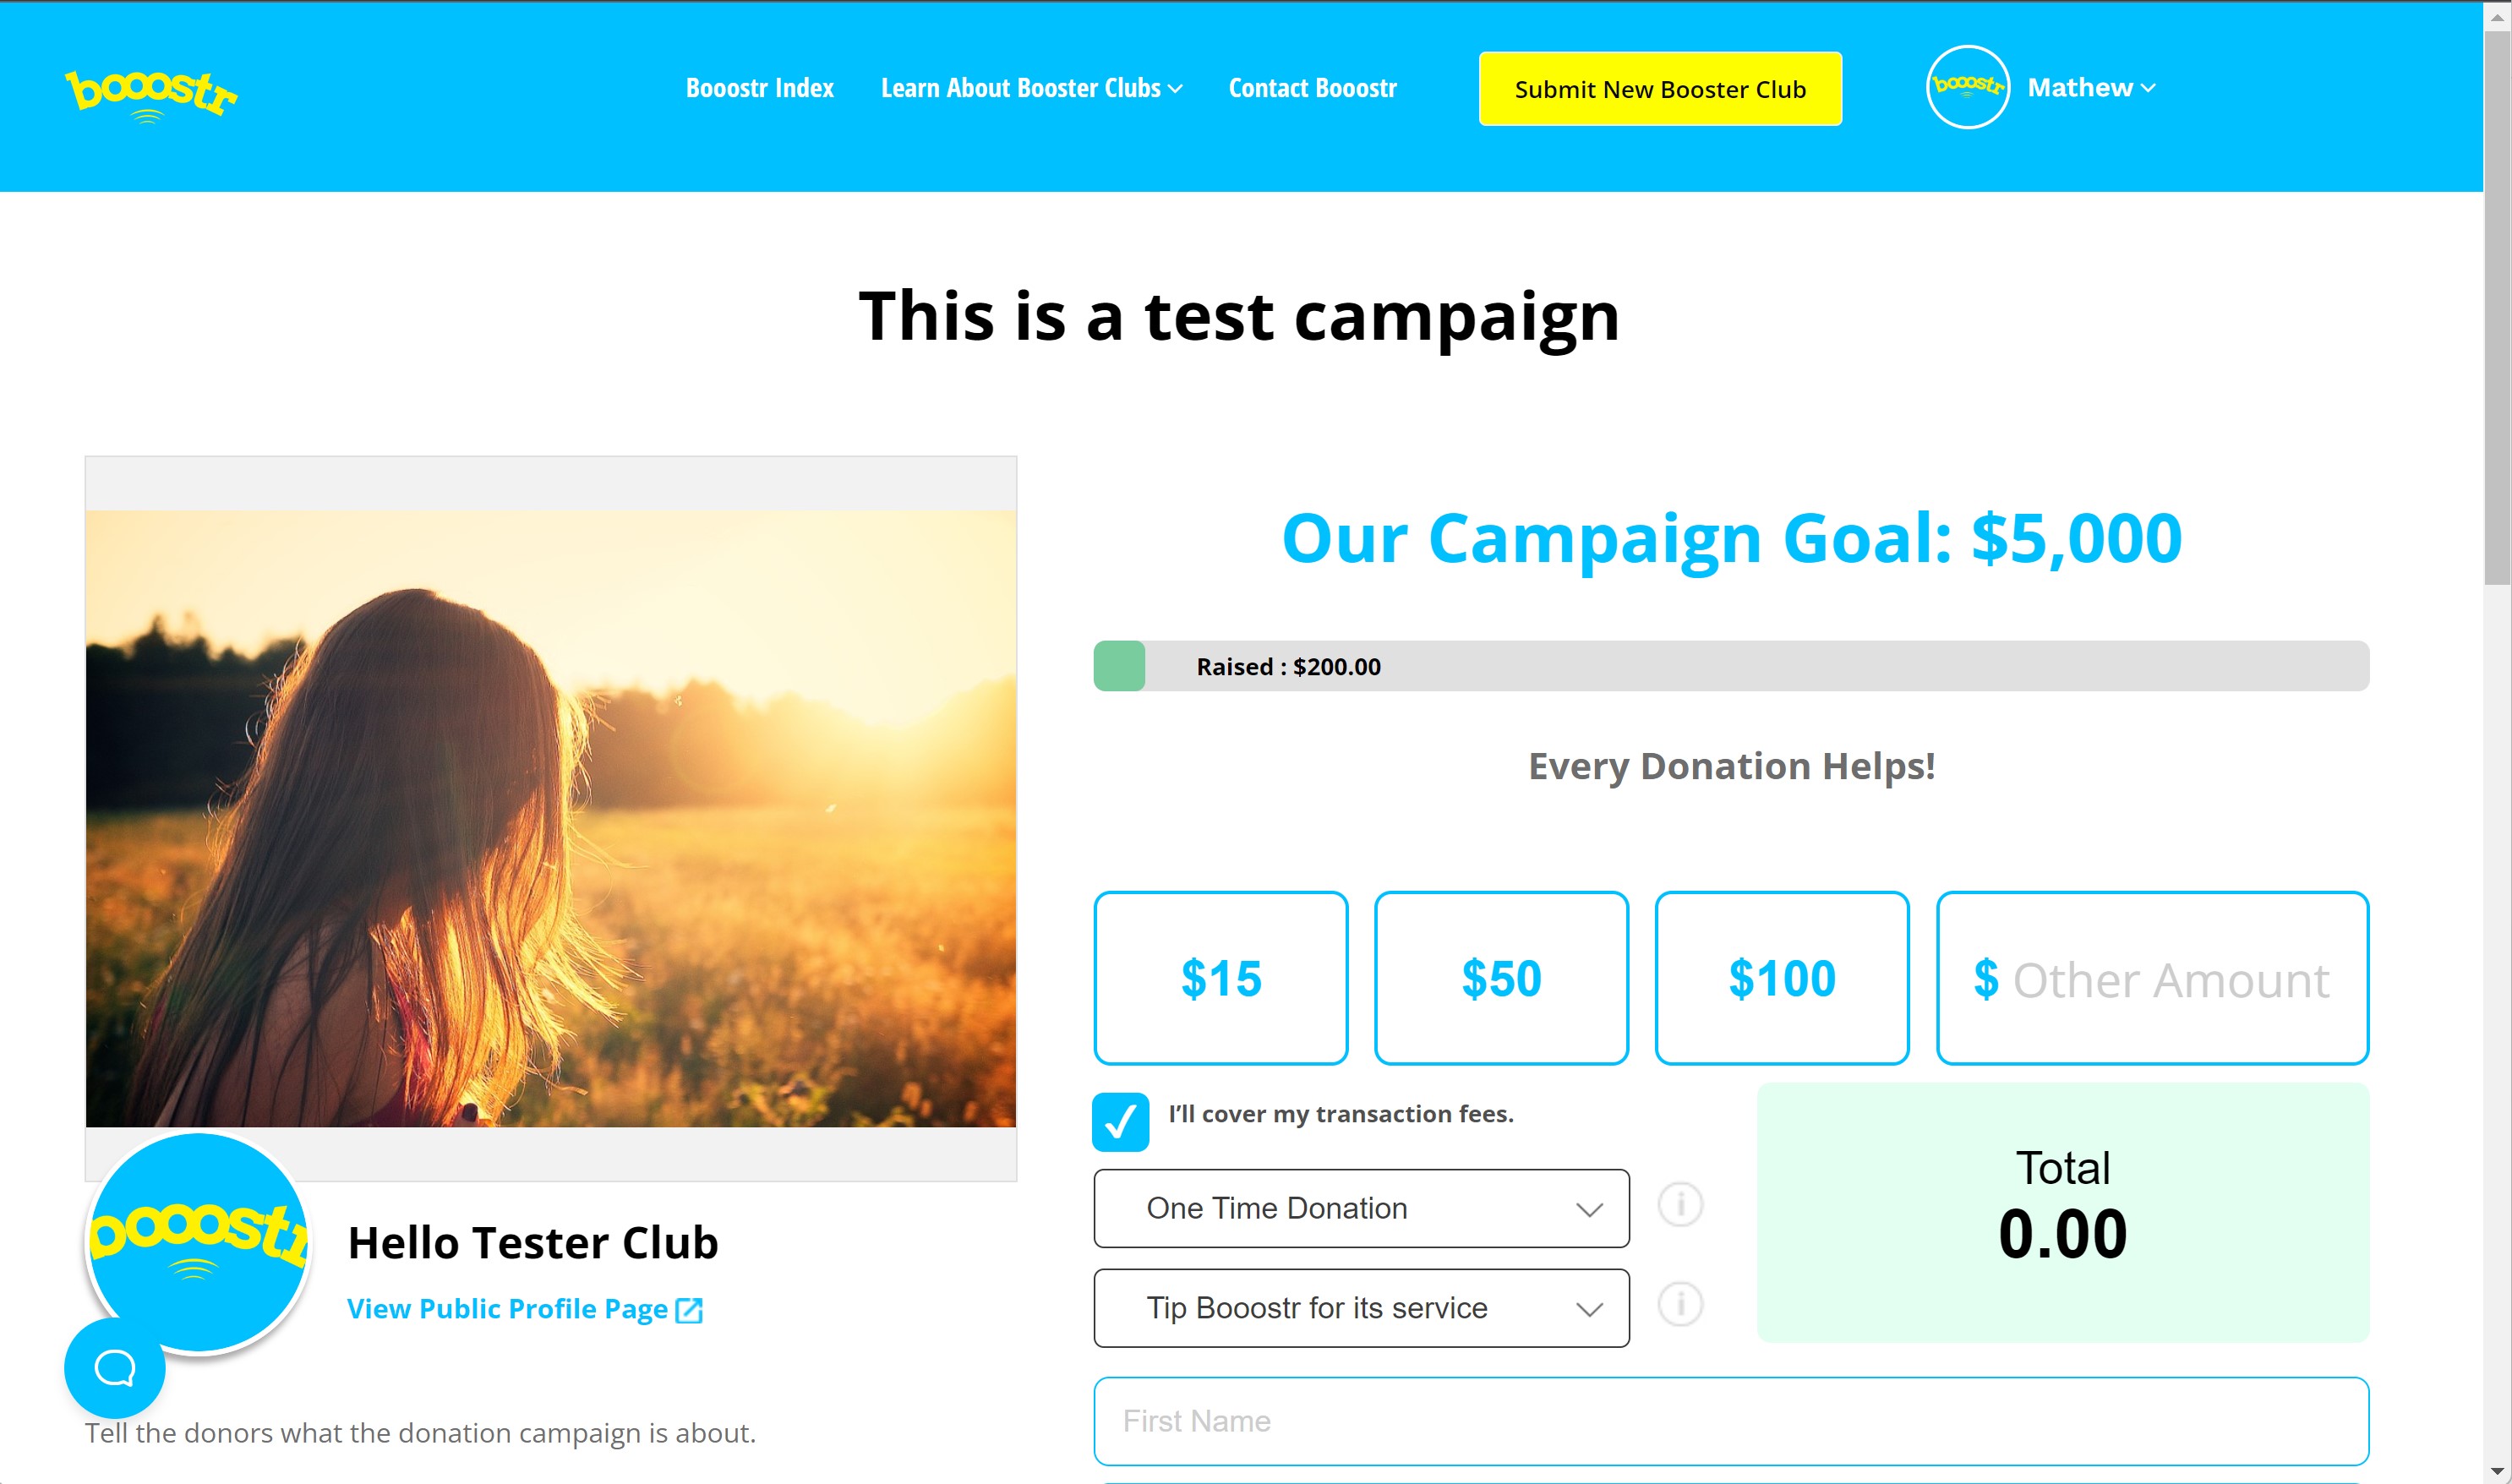 Example of a nonprofit's donation campaign landing page on Booostr.